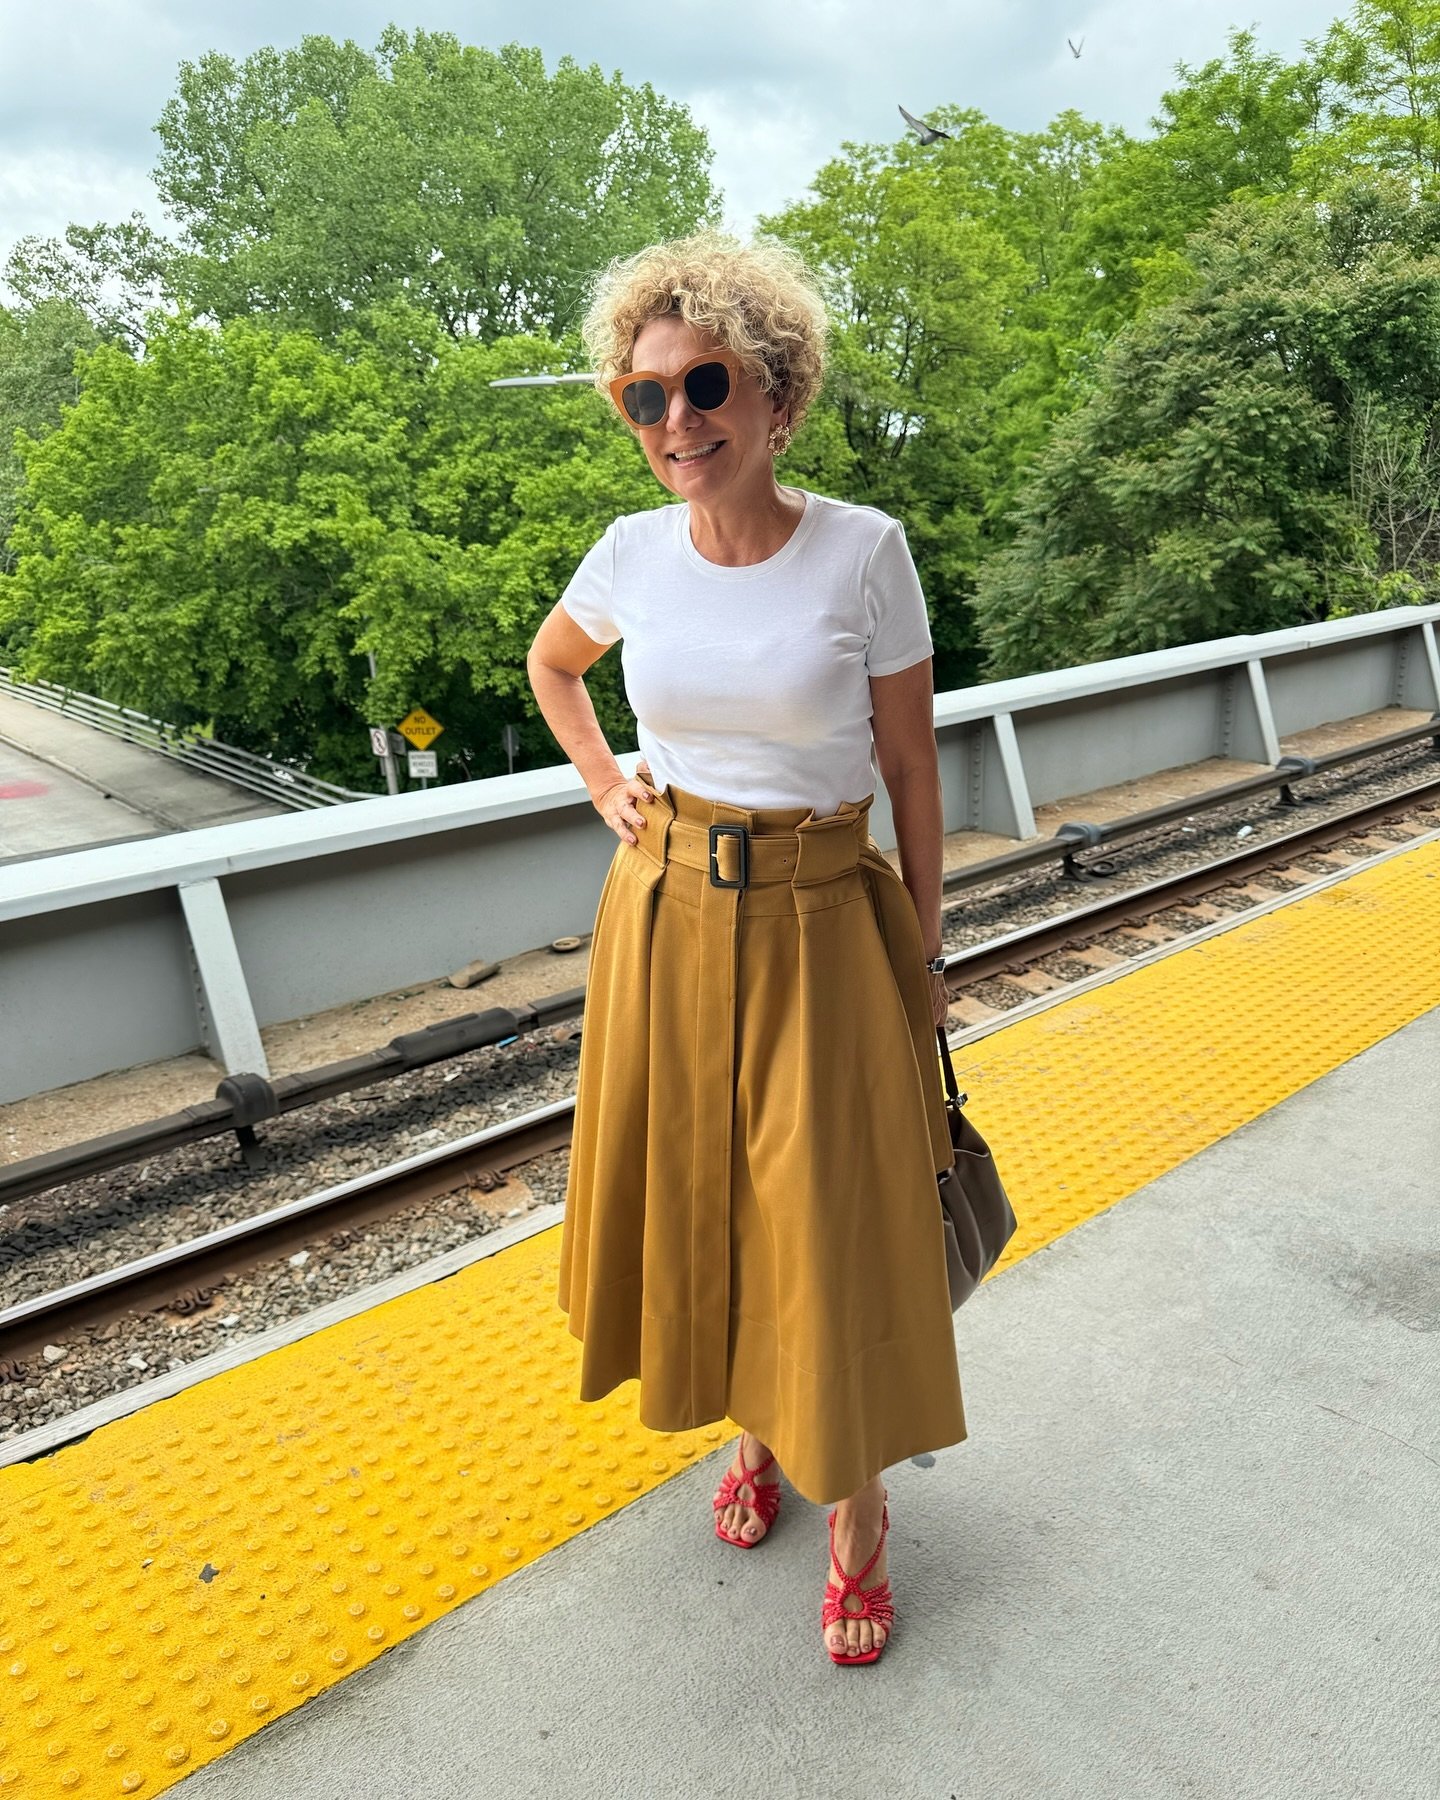 Some thoughts about second-hand purchases ⤵️

I bought this skirt from one of my favorite brands. Their prices are kind of high for my budget - we all have priorities in life, right? 

That&rsquo;s how I do it: 

➡️ Once in a while I check my favorit